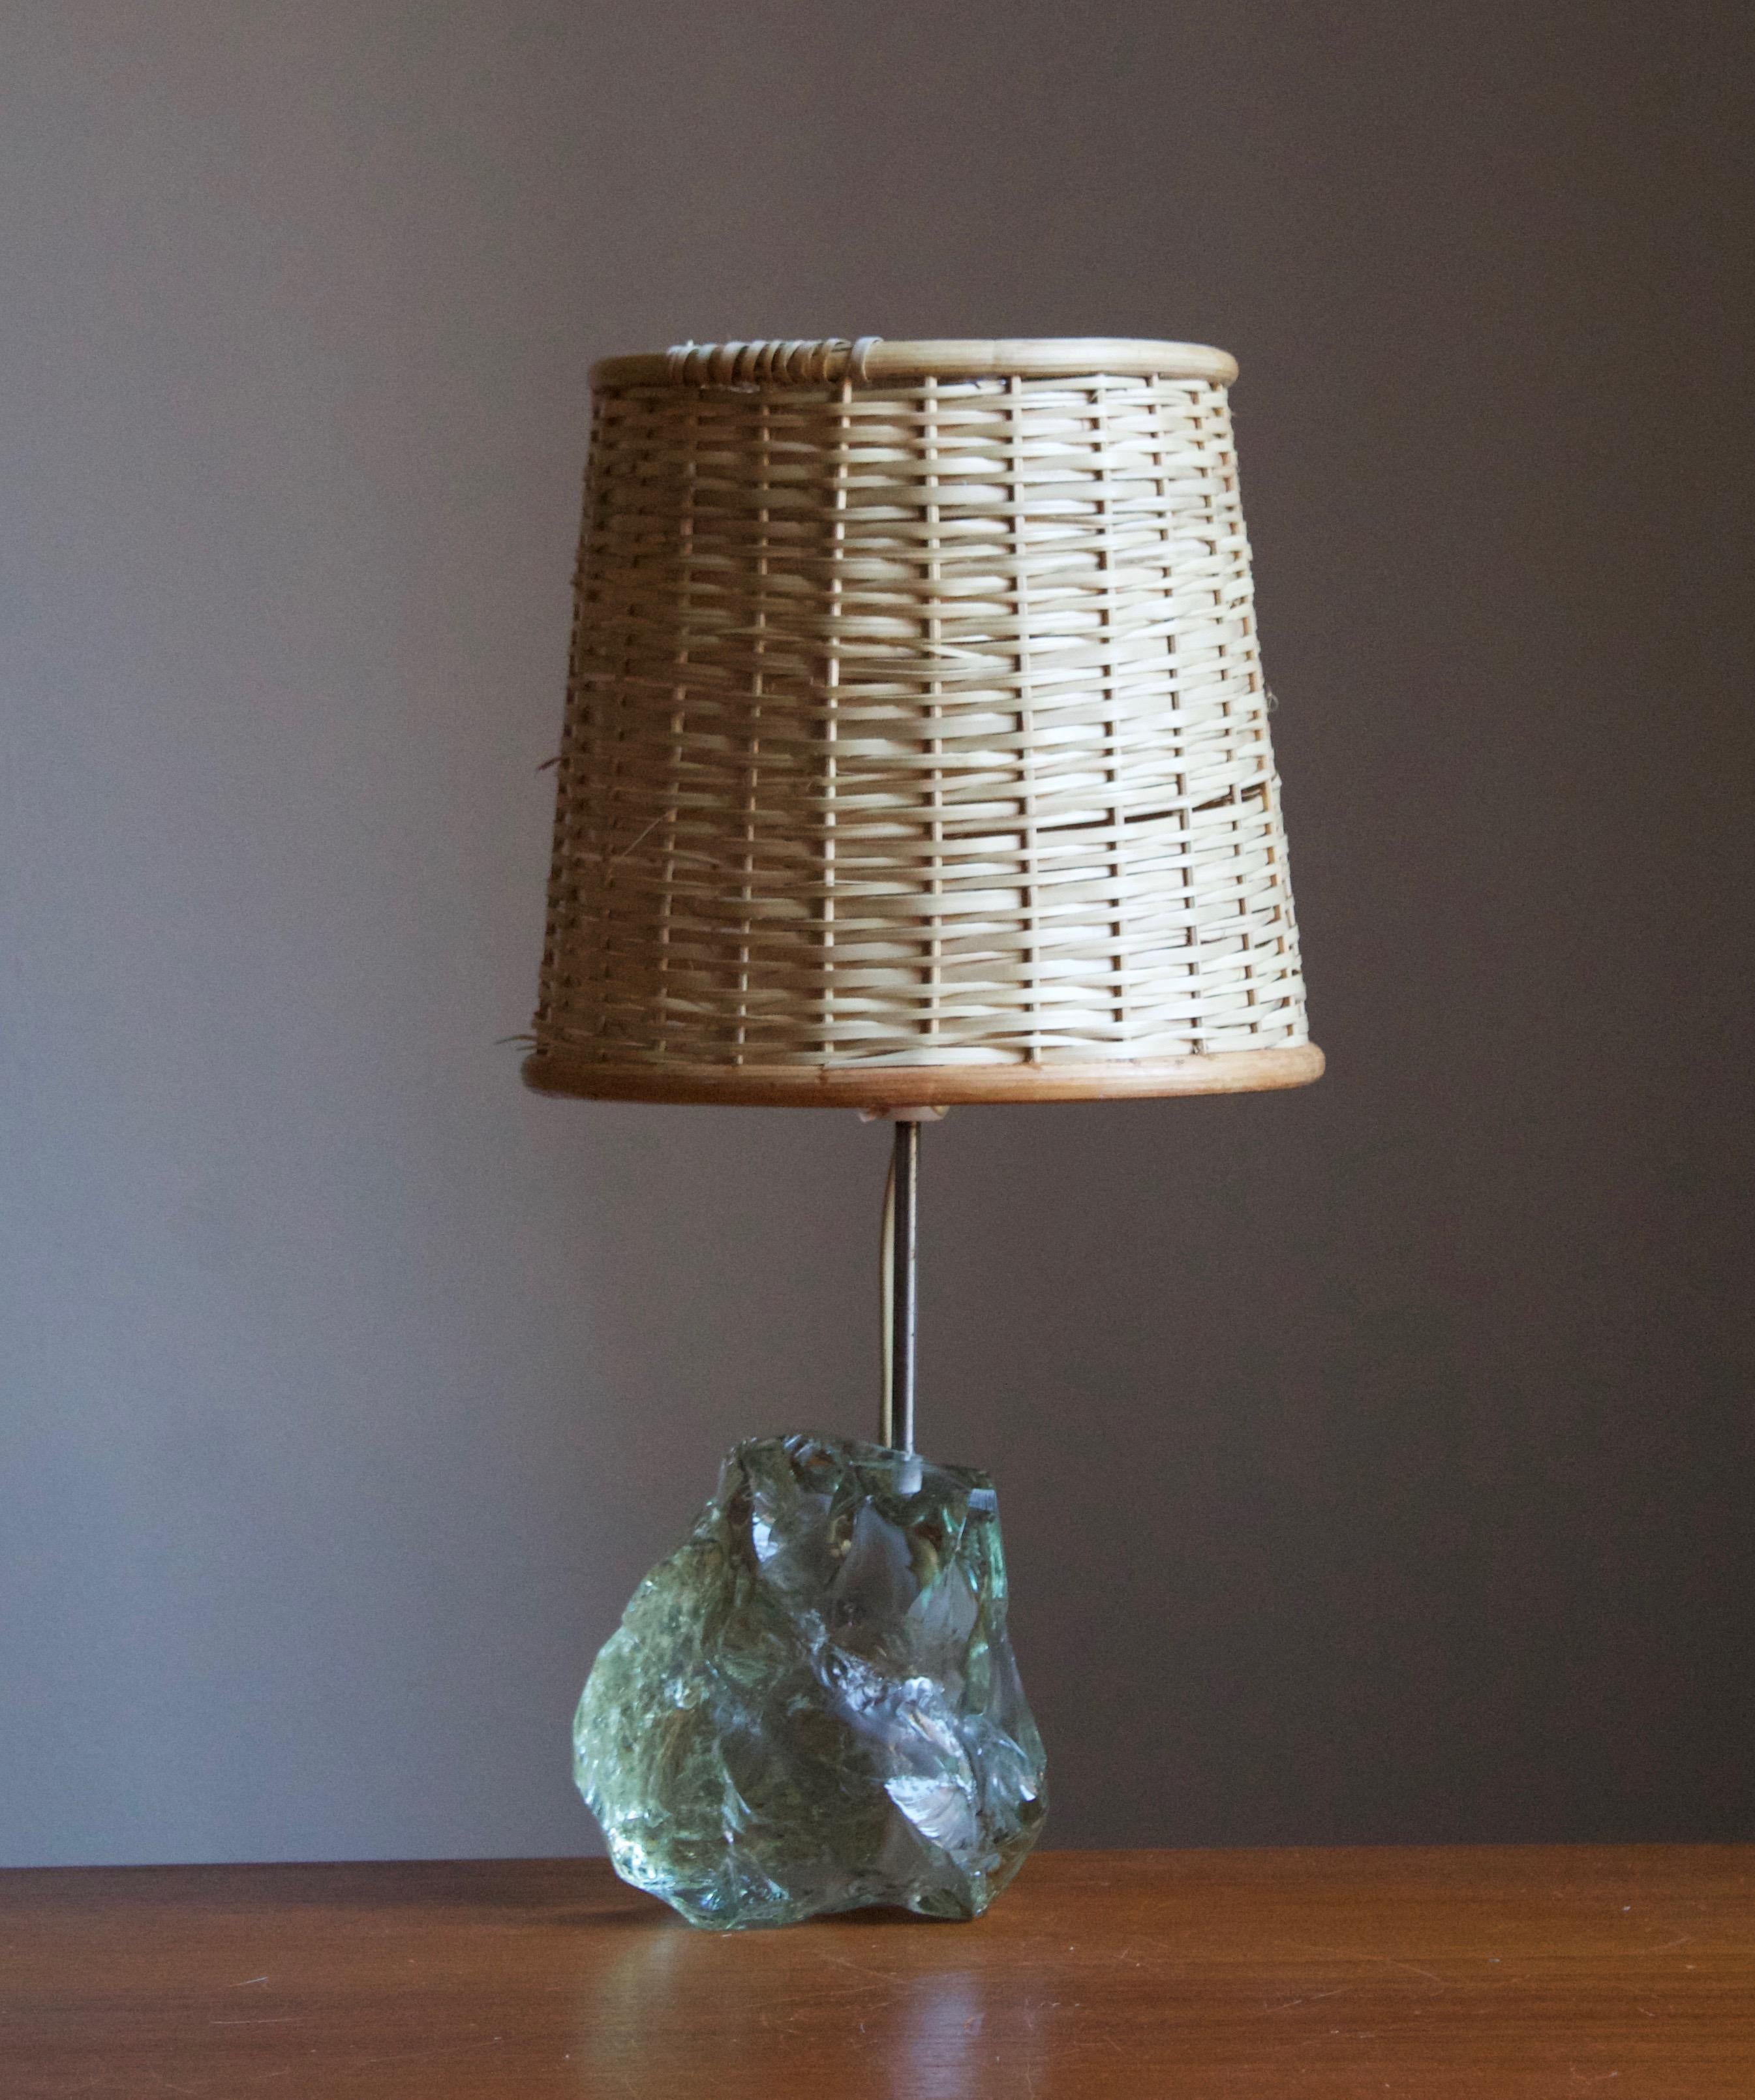 A table lamp, designed and produced in Denmark, c. 1960s. 

Stated dimensions exclude lampshade. Dimensions includes harp in the position illustrated in the images. Illustrated basket lampshade can be included upon request.

Other designers